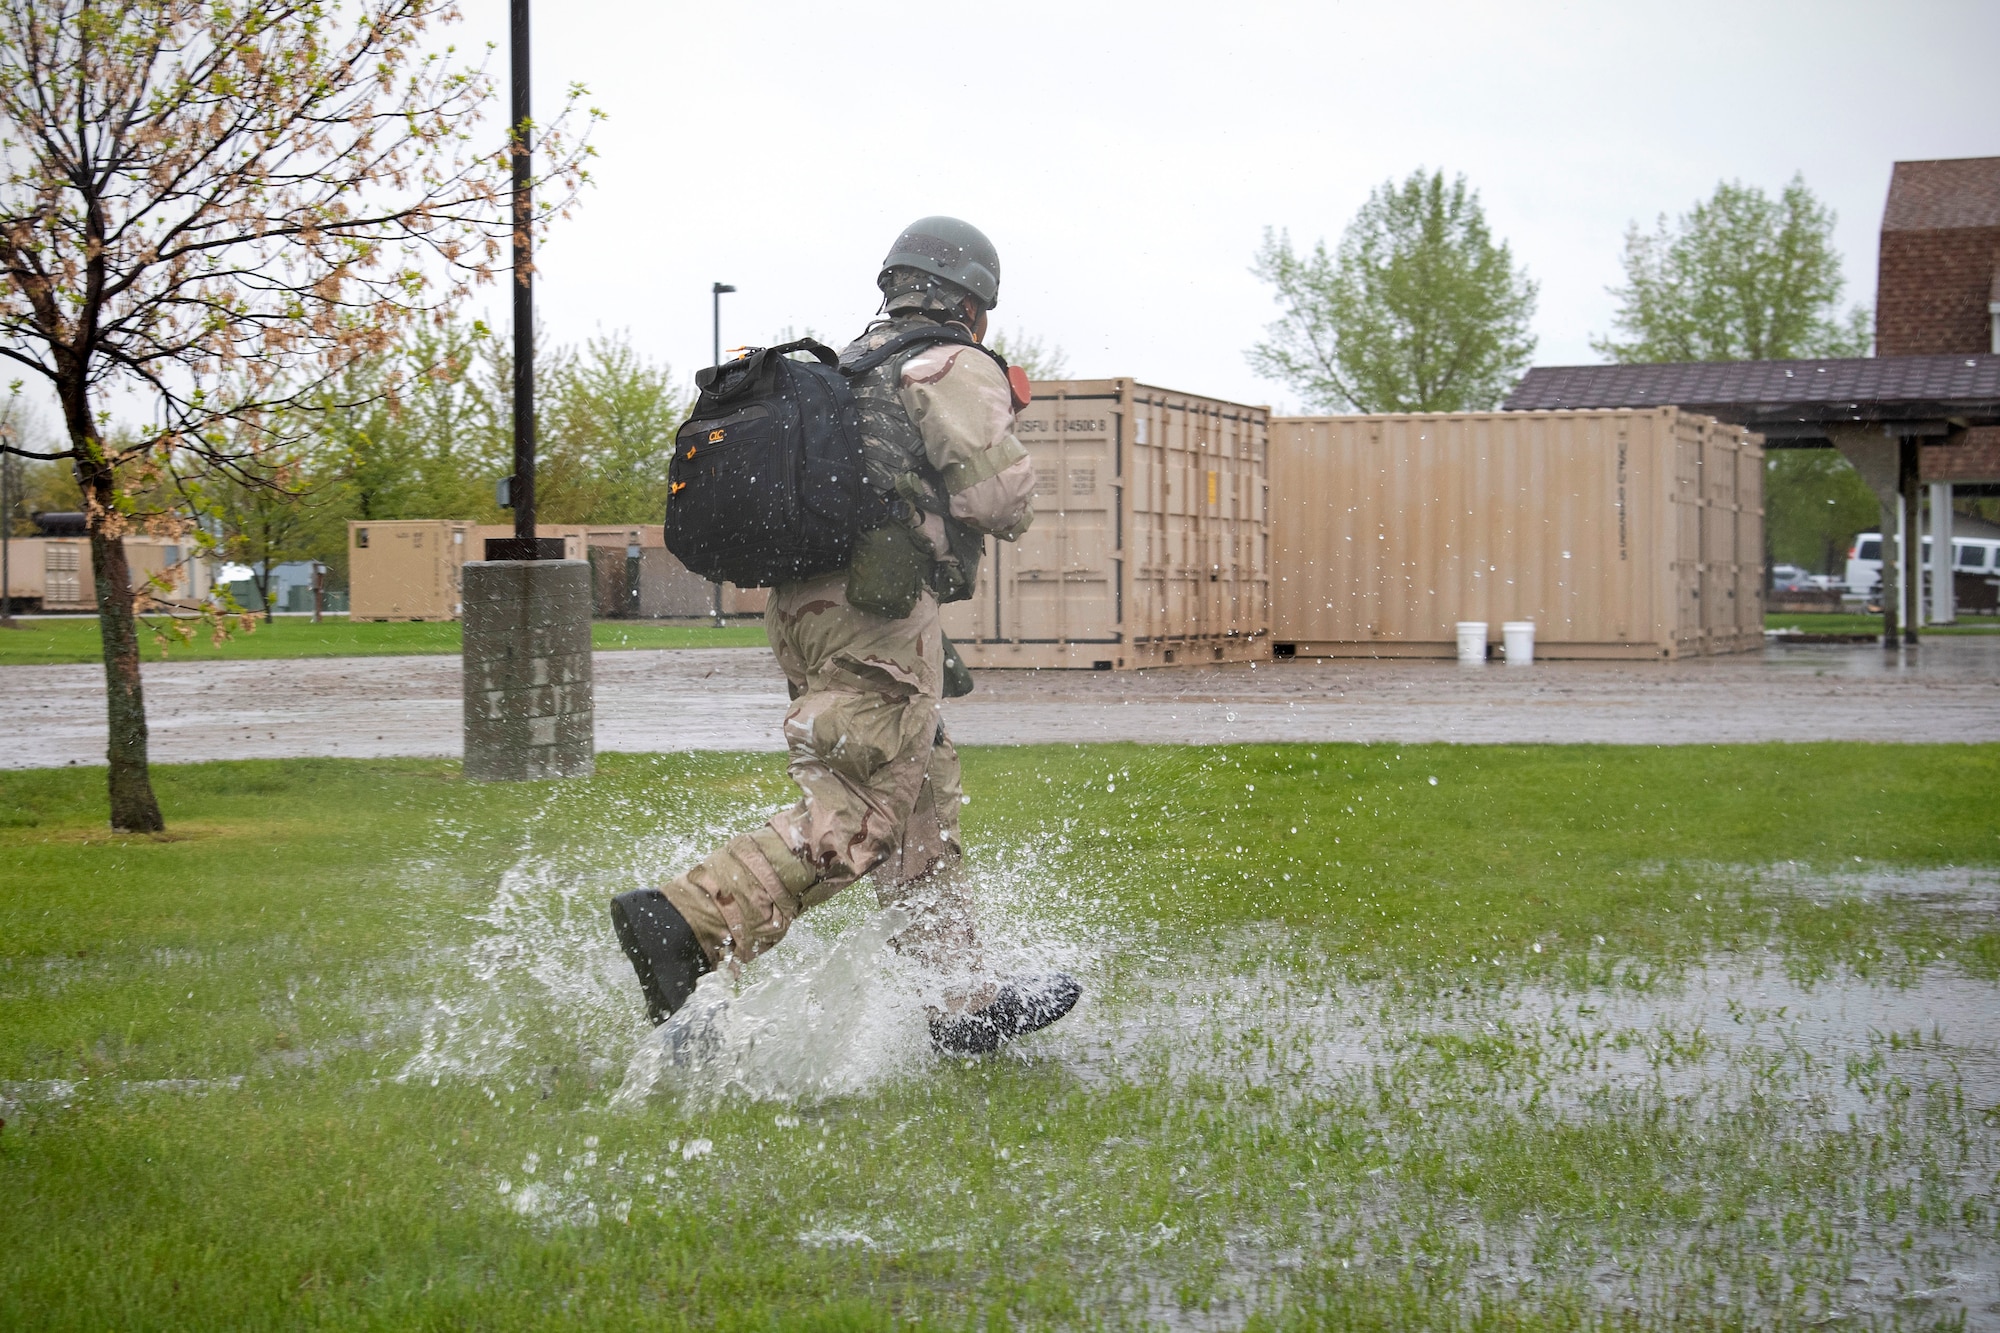 A Grand Forks Air Force Base airman runs across a simulated deployment camp in response to an attack May 22, 2019, during exercise Summer Viking 19-01 on the Air National Guard Base in Fargo, North Dakota. The 4-day exercise tested participants’ organizational, expeditionary and readiness skills to better prepare for real deployment. (U.S. Air Force photo by Senior Airman Elora J. Martinez)